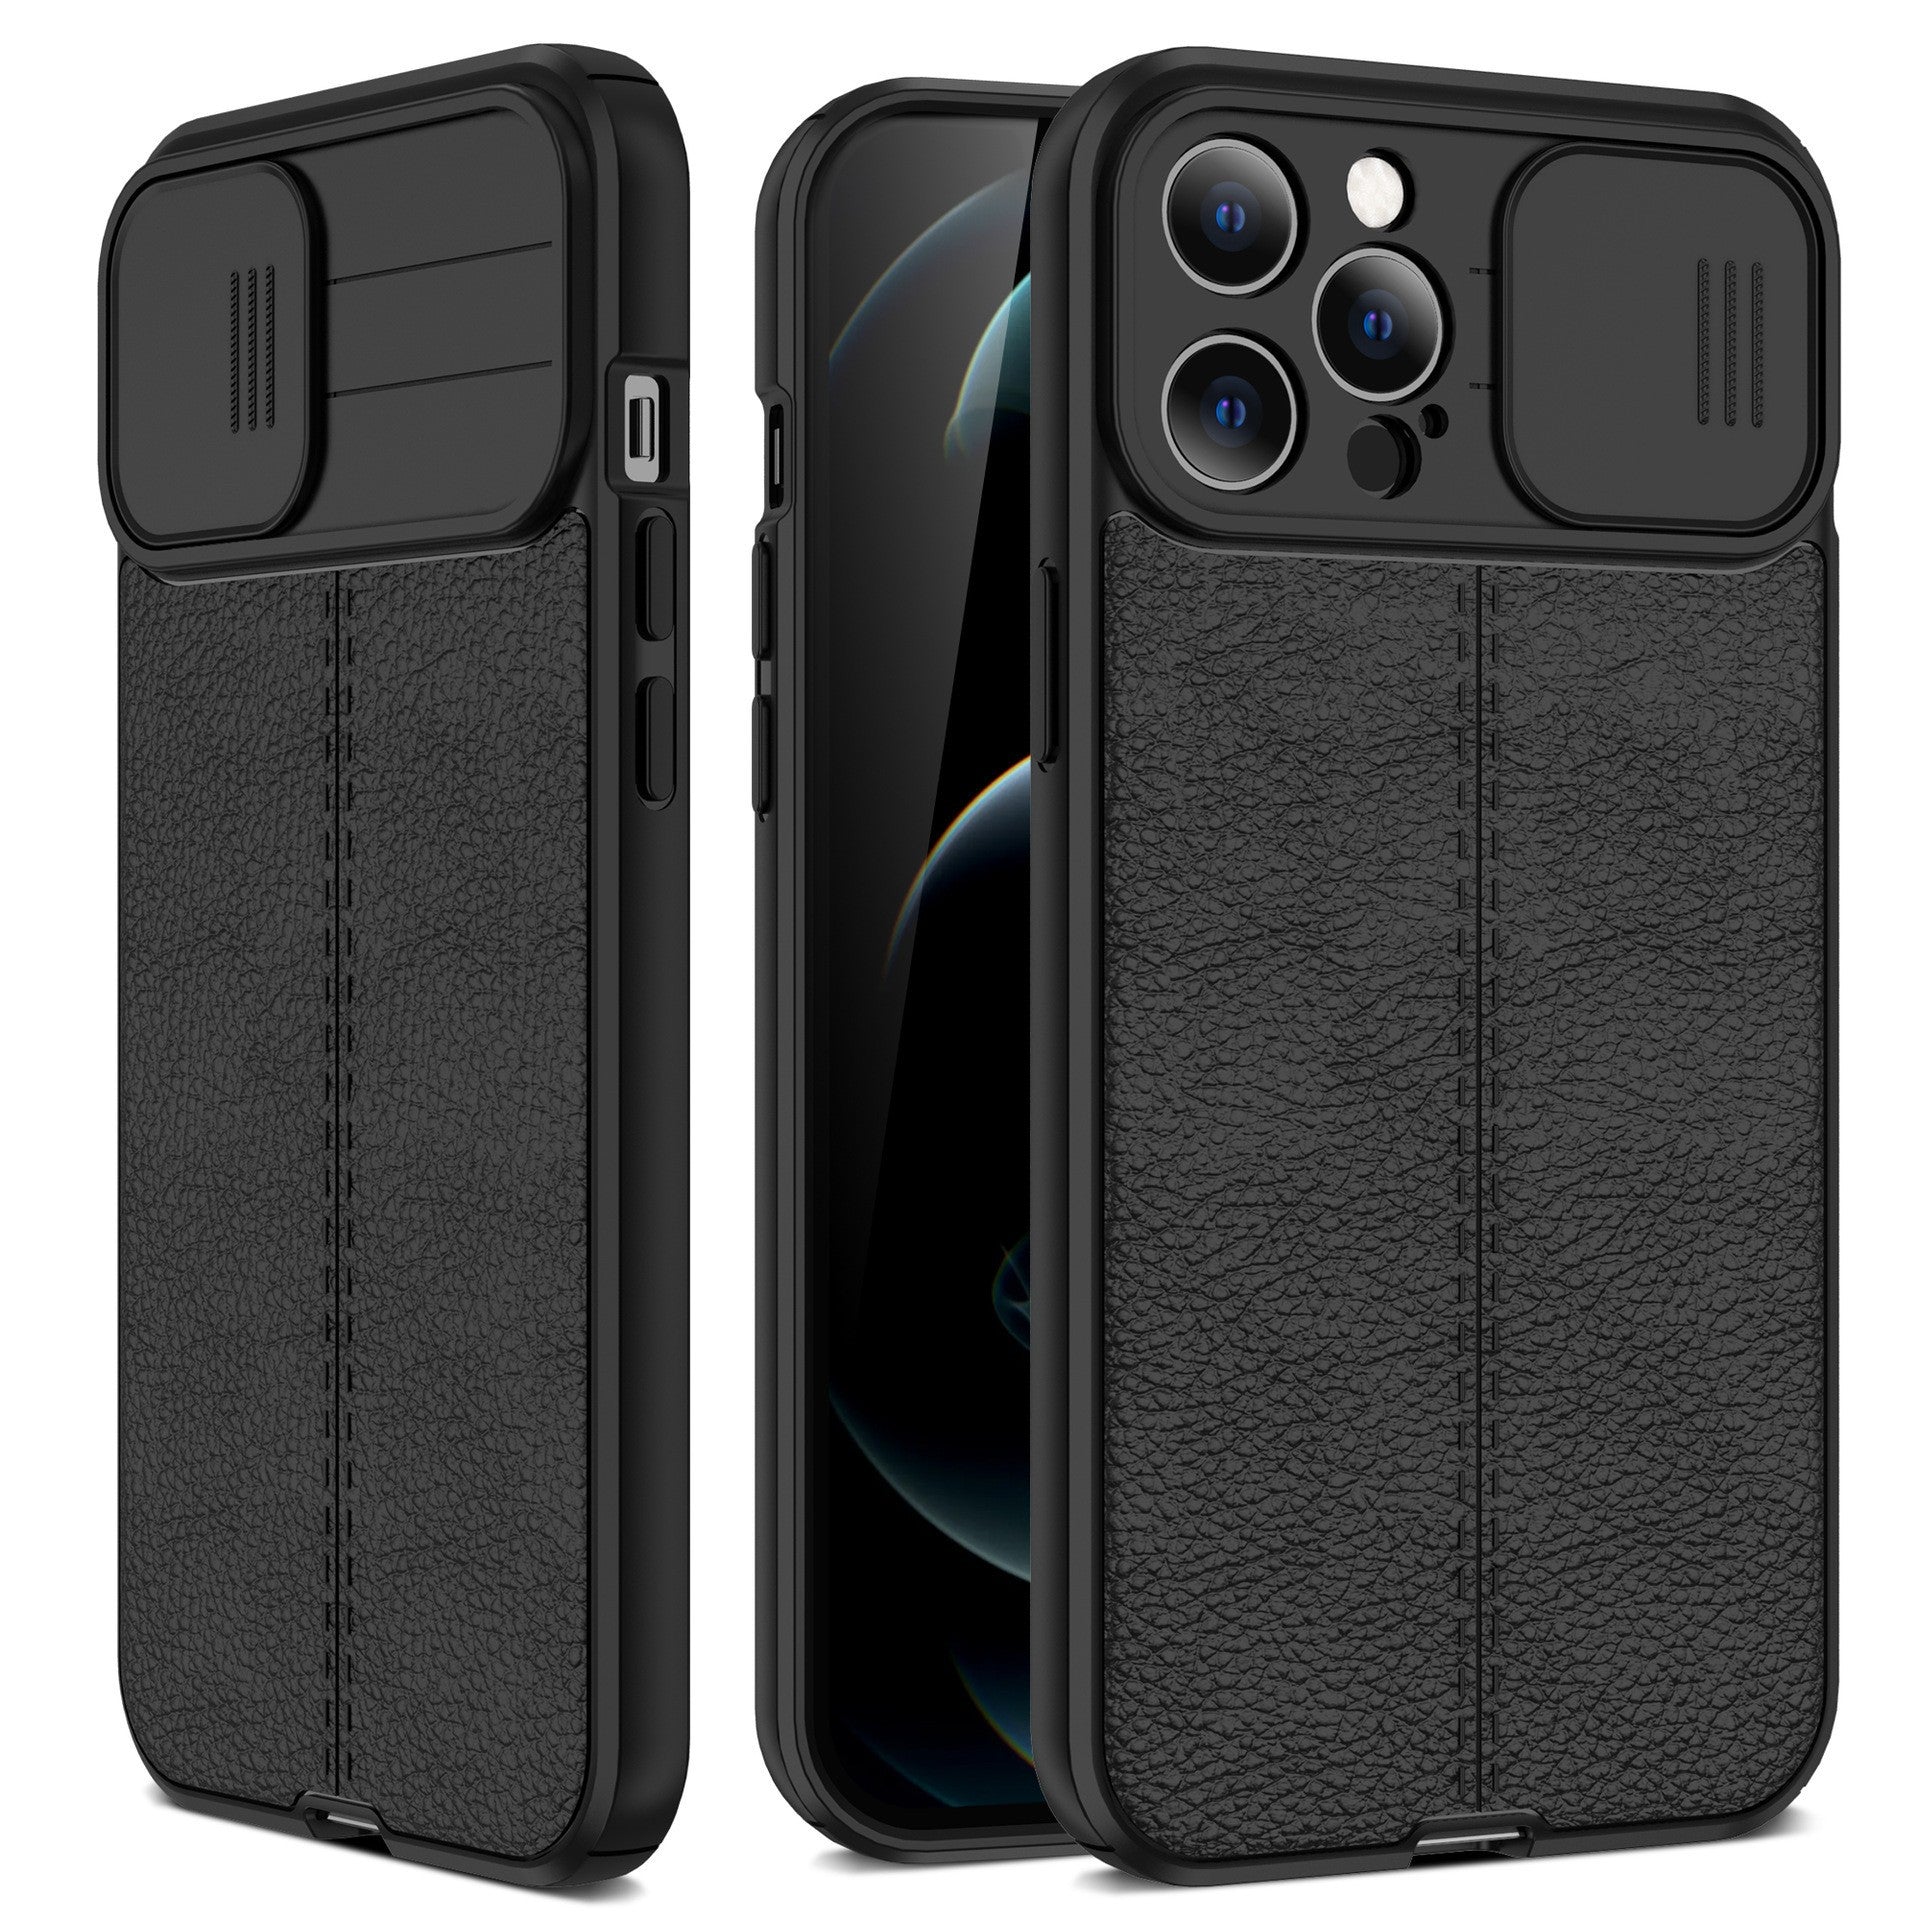 Shock-proof iPhone Case Compatible with iPhone 13/12/11/X/8/7/6 Pro Plus with Sliding Camera Cover $4.99 + Free Shipping